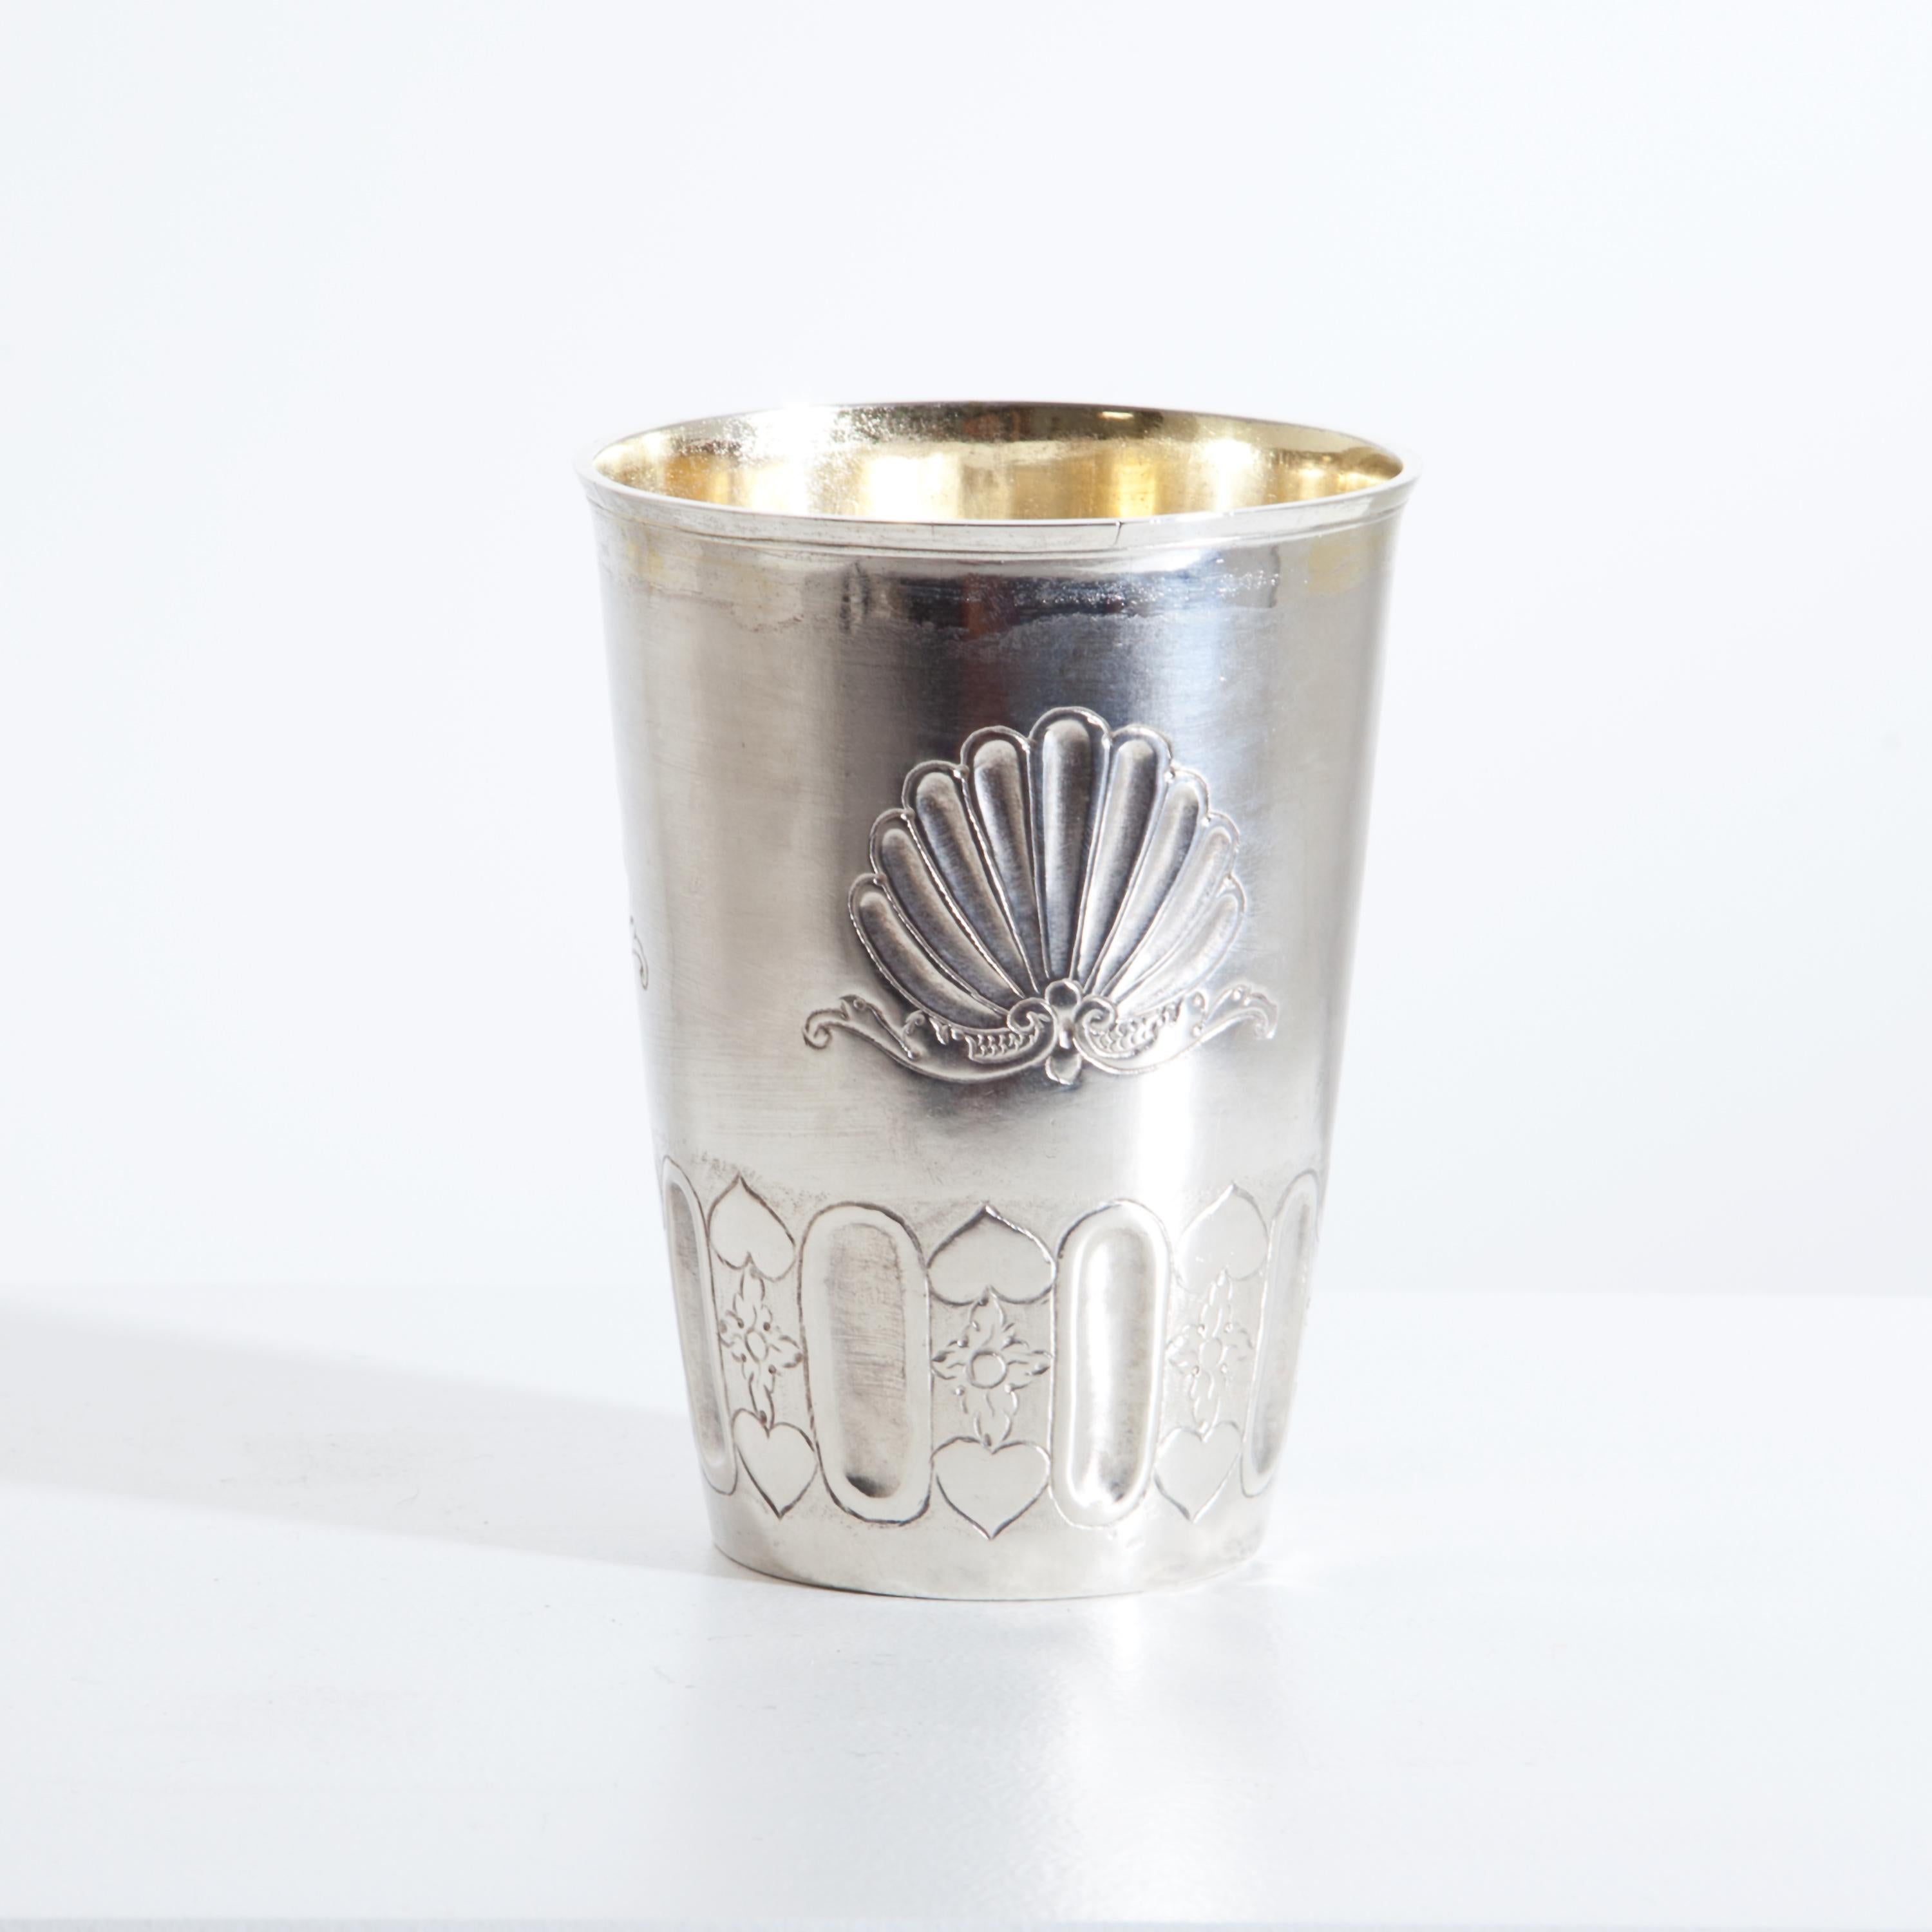 Large silver beaker with conical walls and shell decorations over a band of flutes alternating with heart and leaf decorations. Gold plated inside. Stamped Augsburg, Melchior Burtenbach (Purtenbach). Lit: Seling 2479.